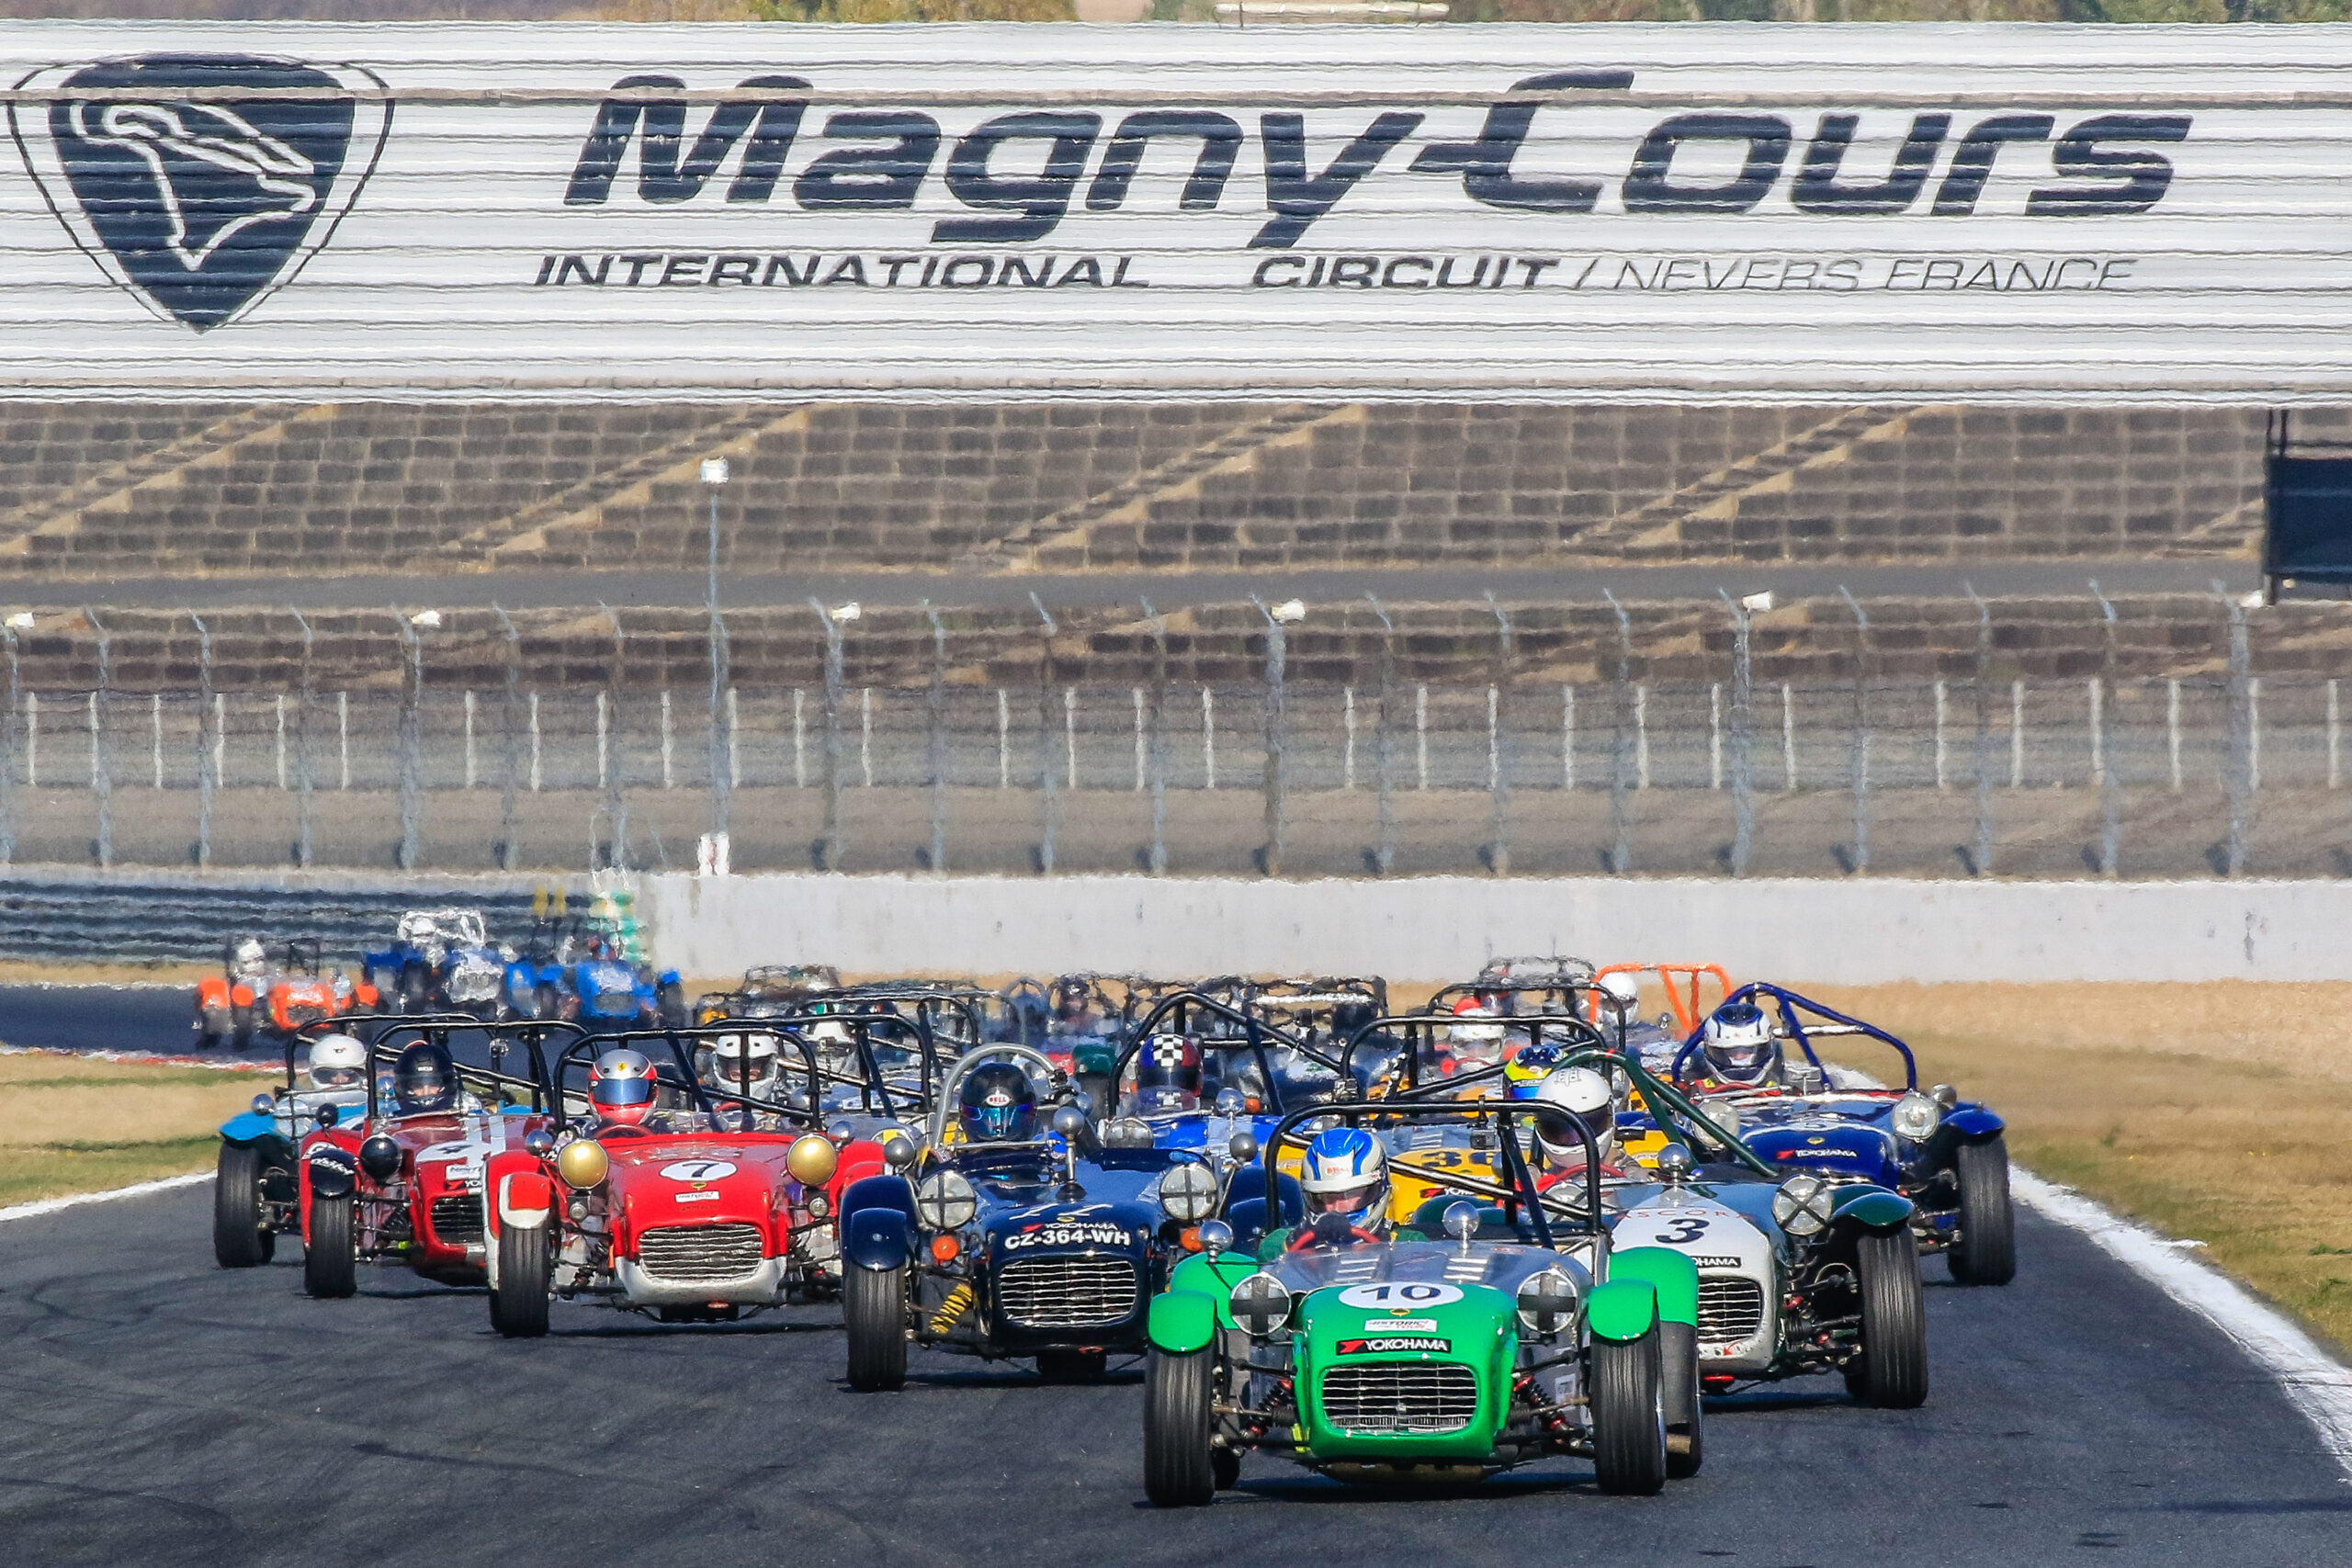 HISTORIC TOUR MAGNY-COURS: OPENING UP TO AS MANY PEOPLE AS POSSIBLE